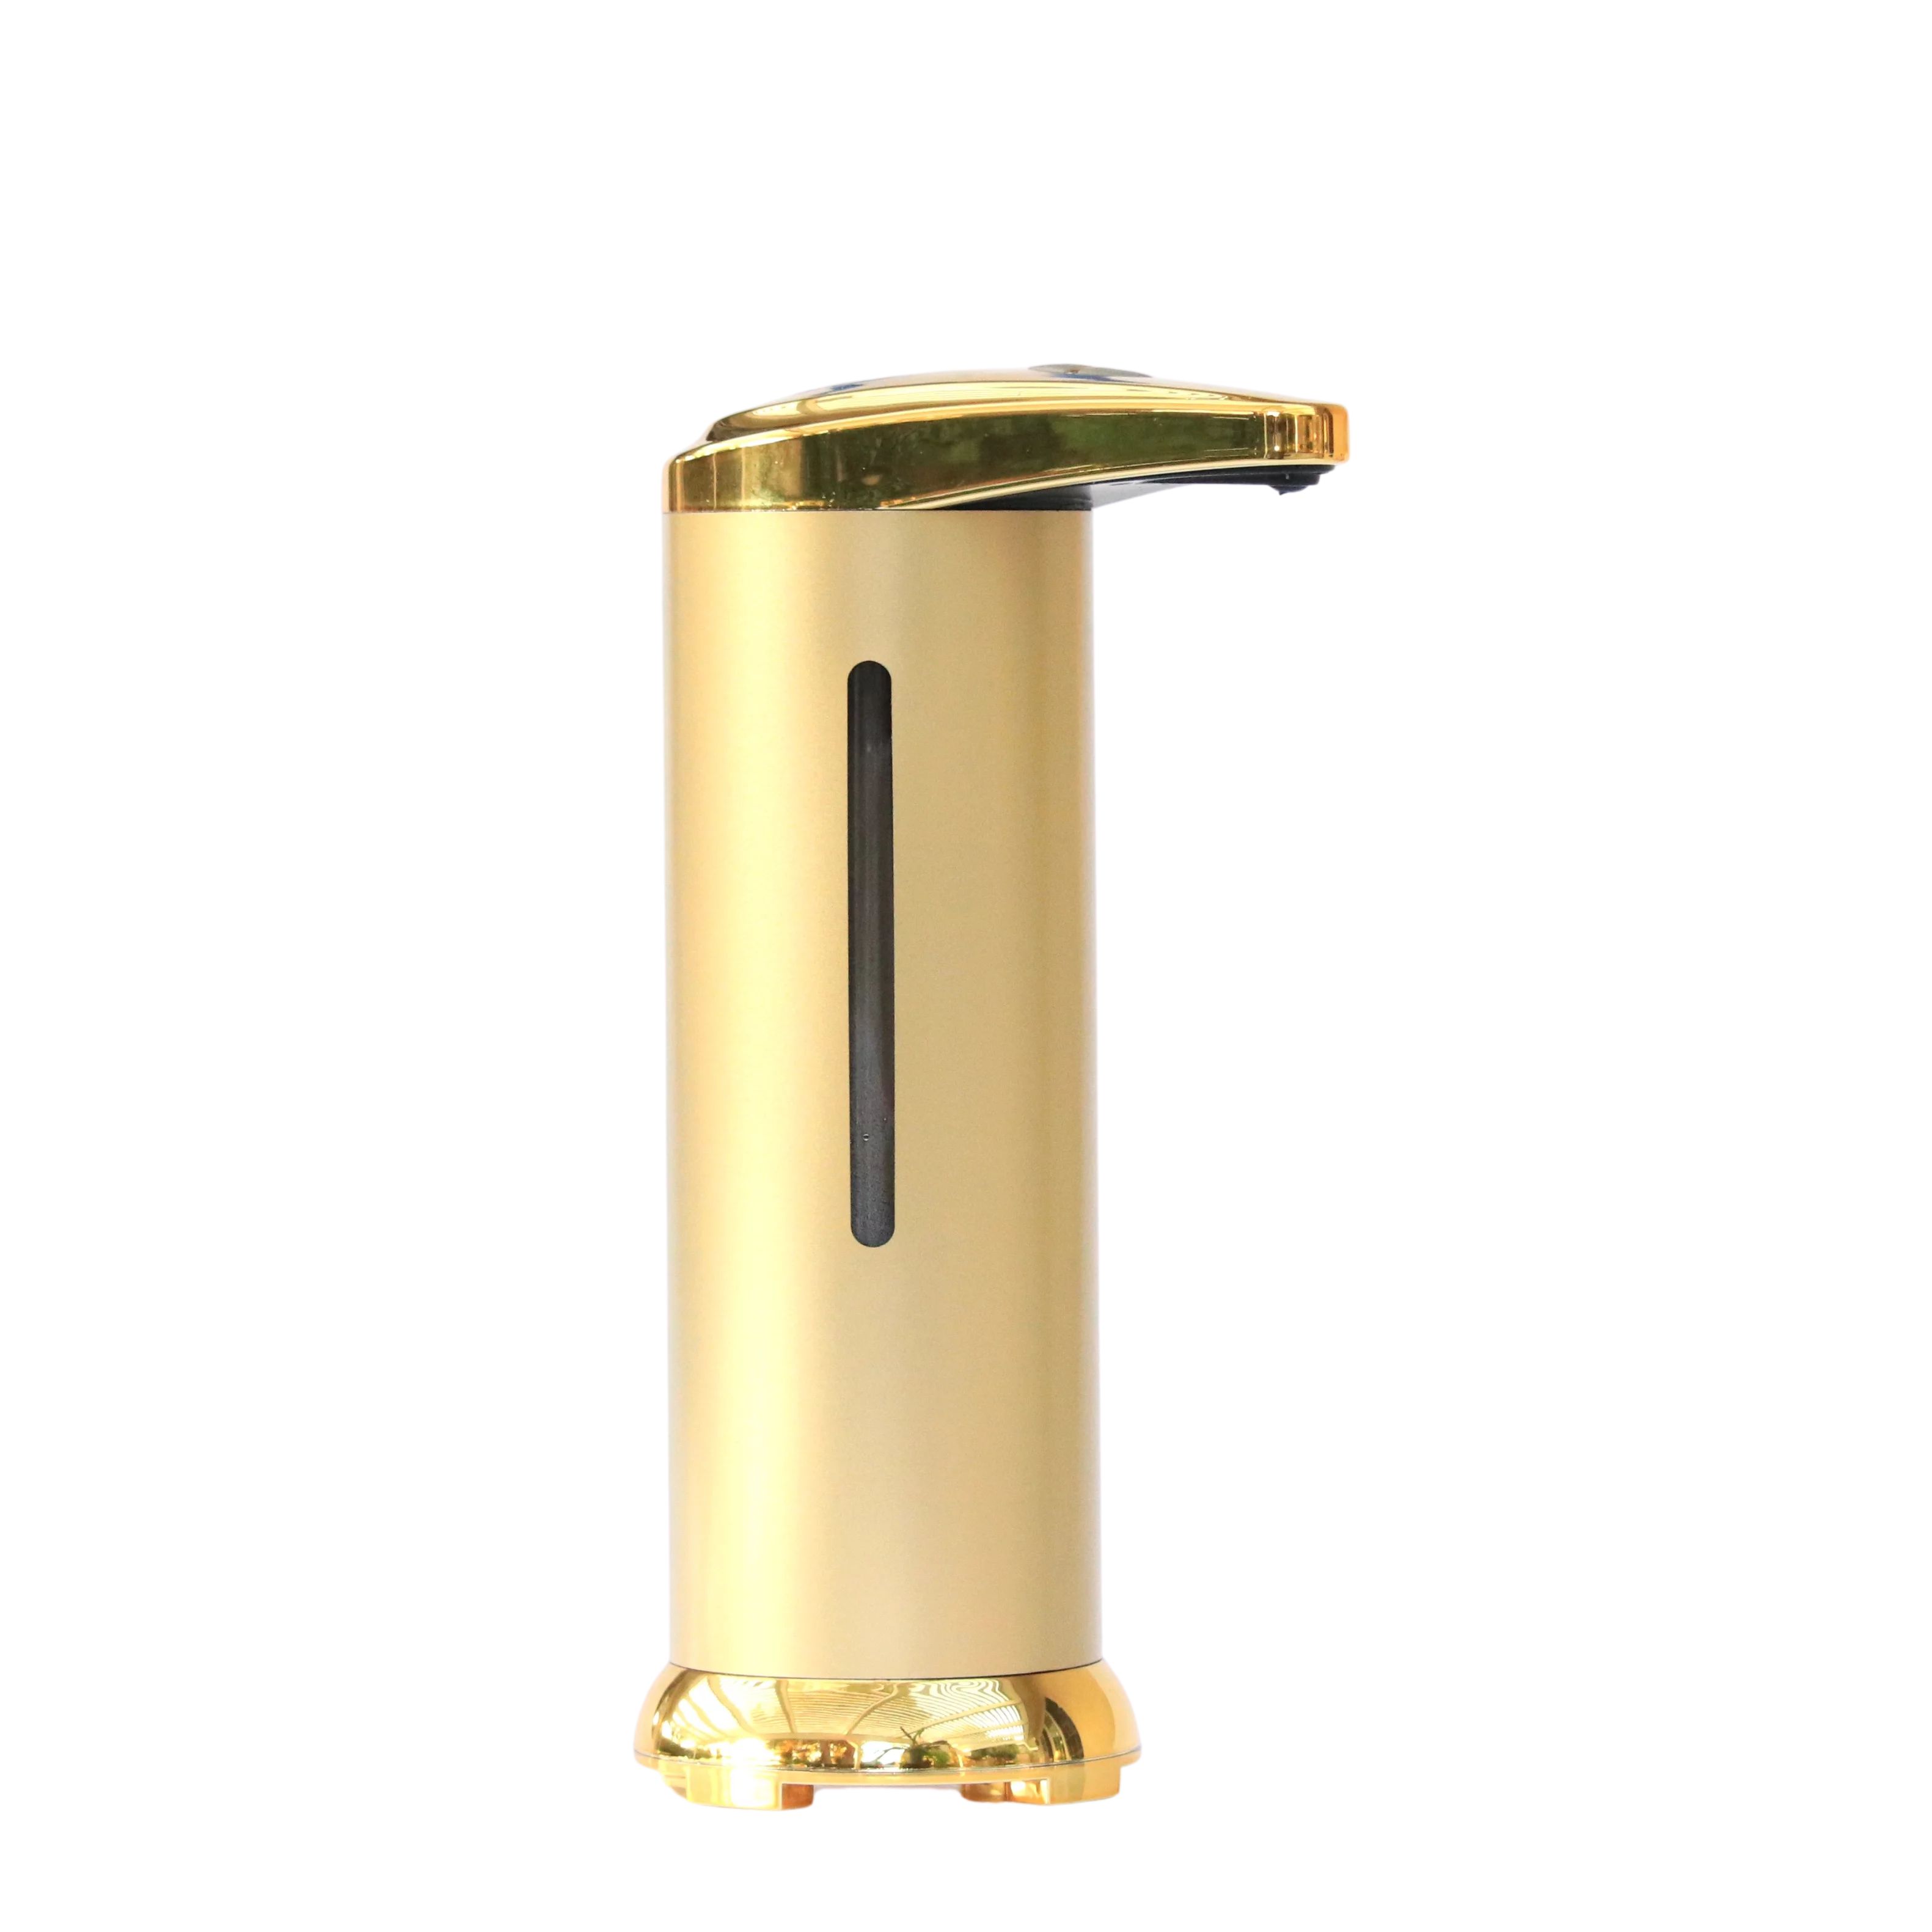 Automatic Touchless Hand Soap Dispenser for Bathroom and Kitchen with Sensor 9.5 oz Gold | Walmart (US)